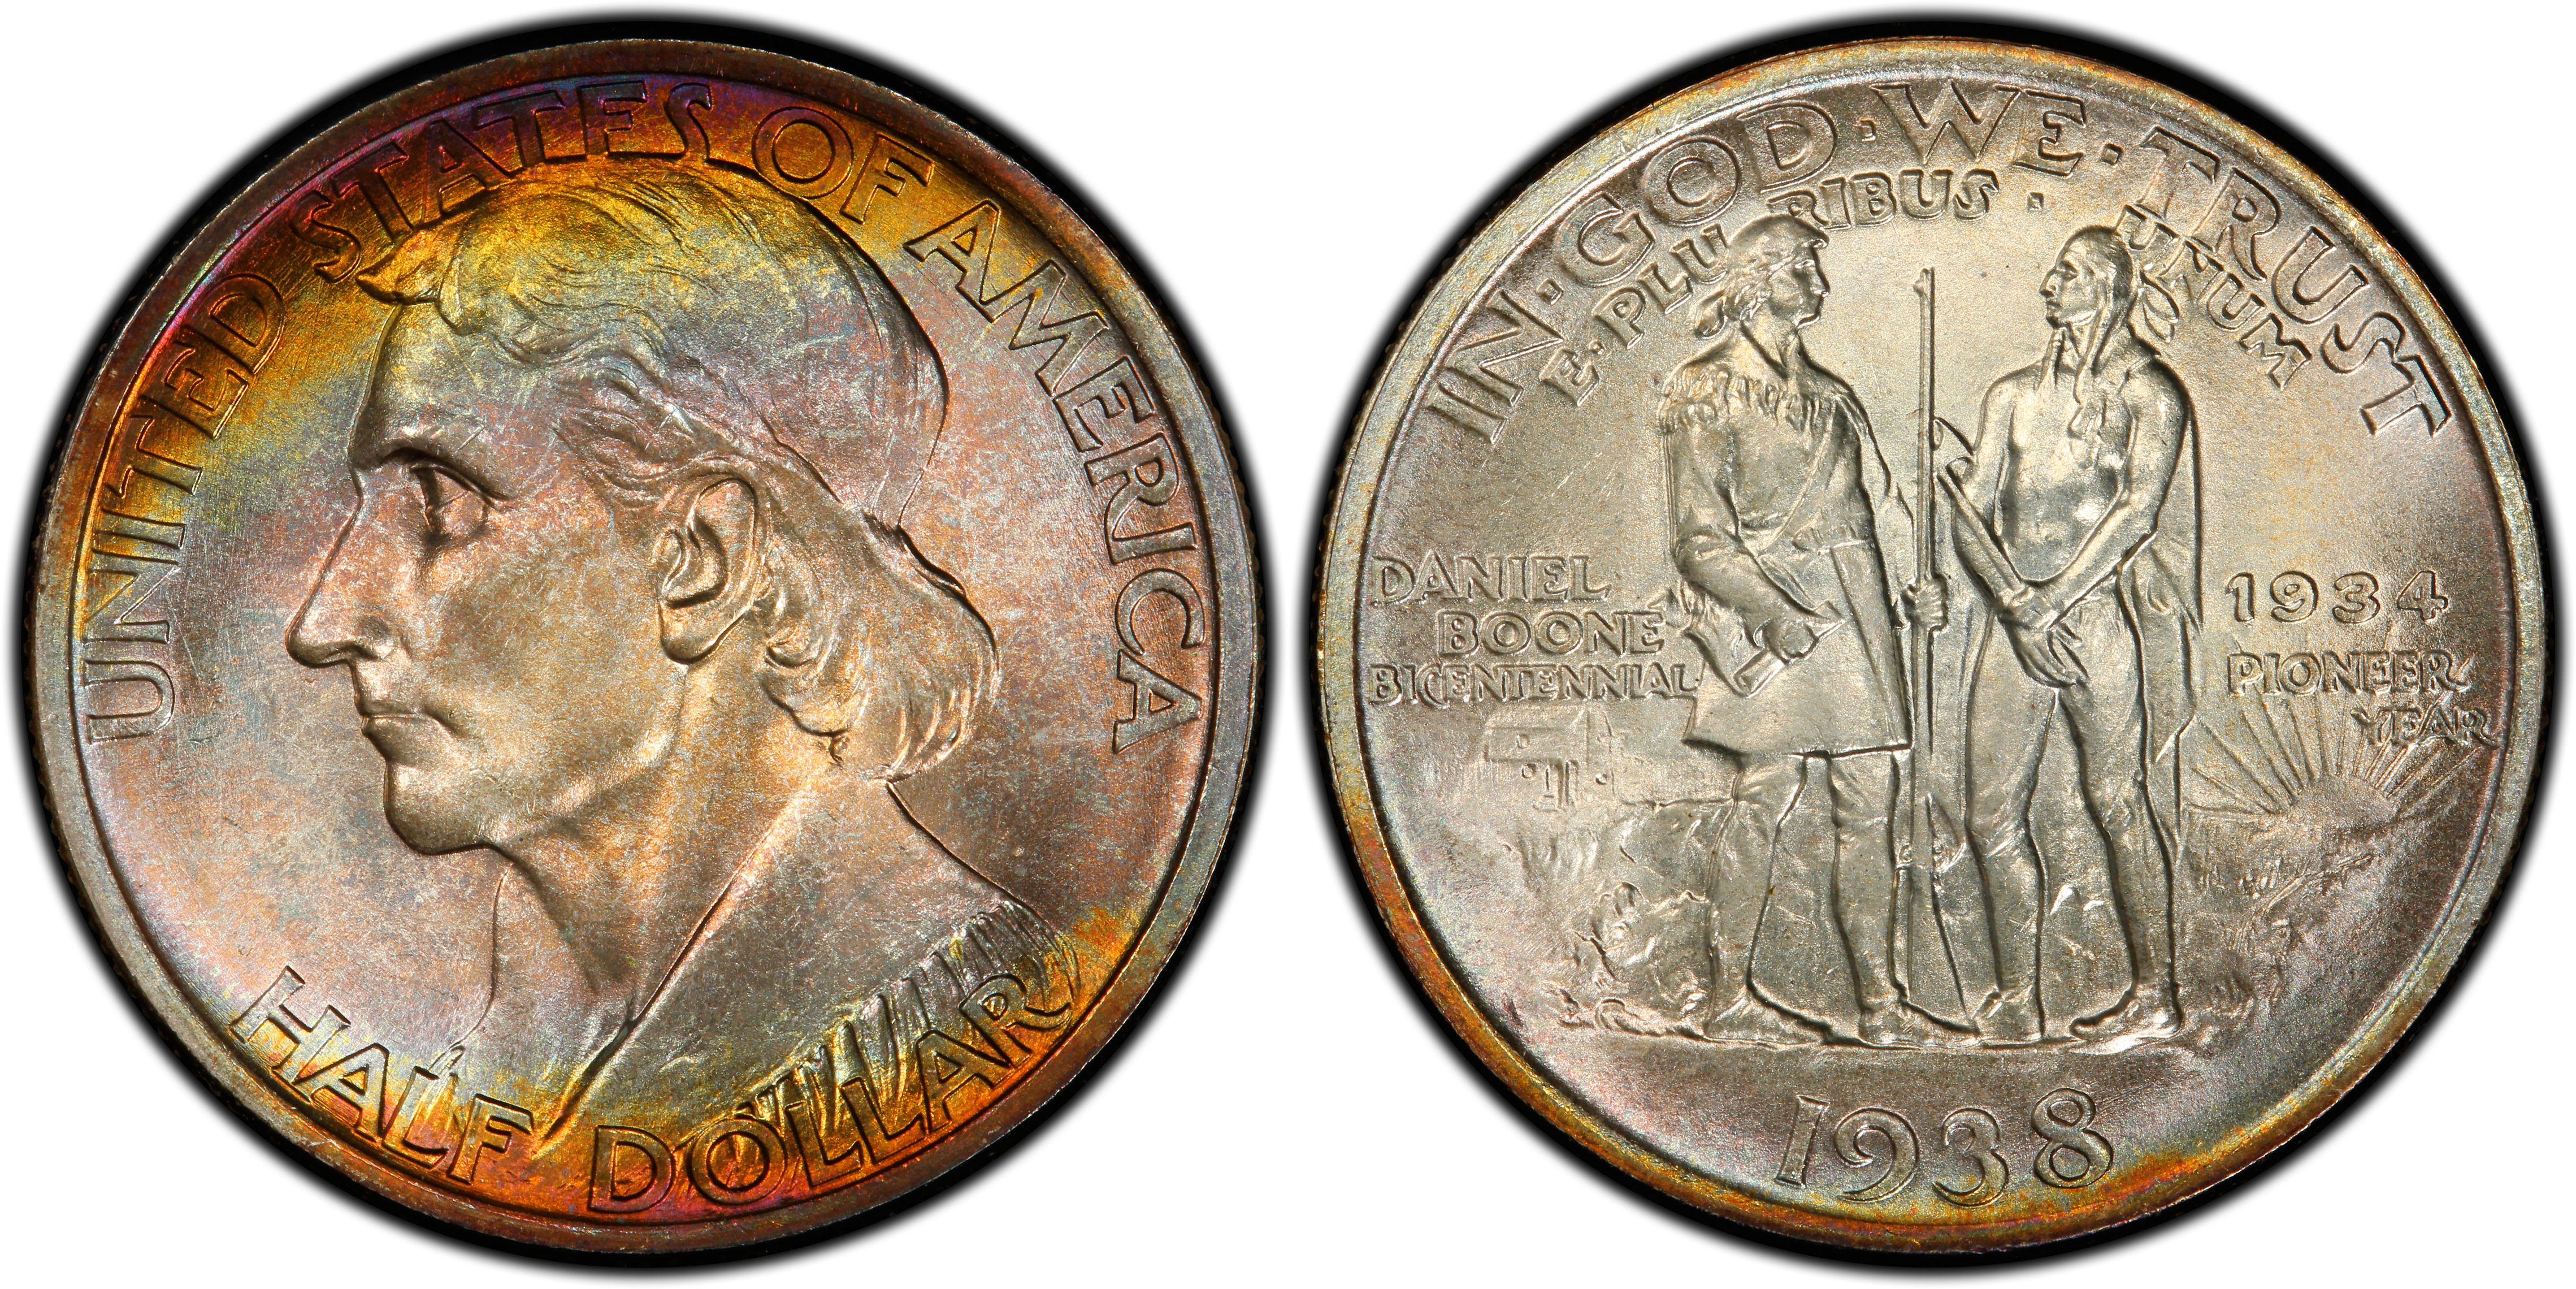 1938 50C Boone (Regular Strike) Silver Commemorative - PCGS CoinFacts